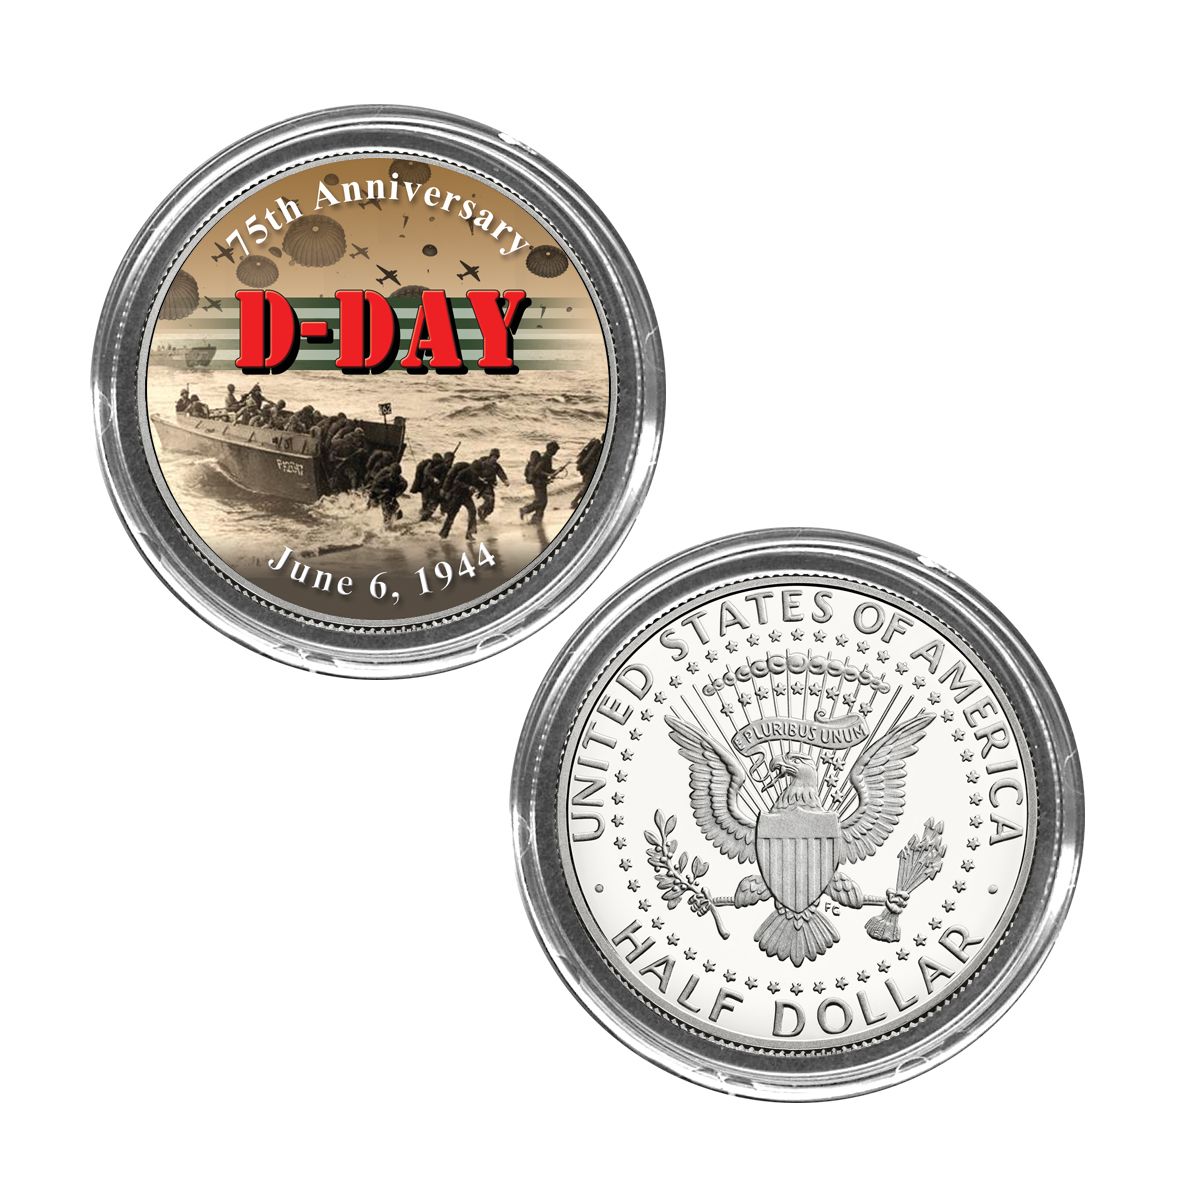 1 Regular 1 Colored 2019 D-Day Juno Beach 75th Anniversary Normandy $2 coins 